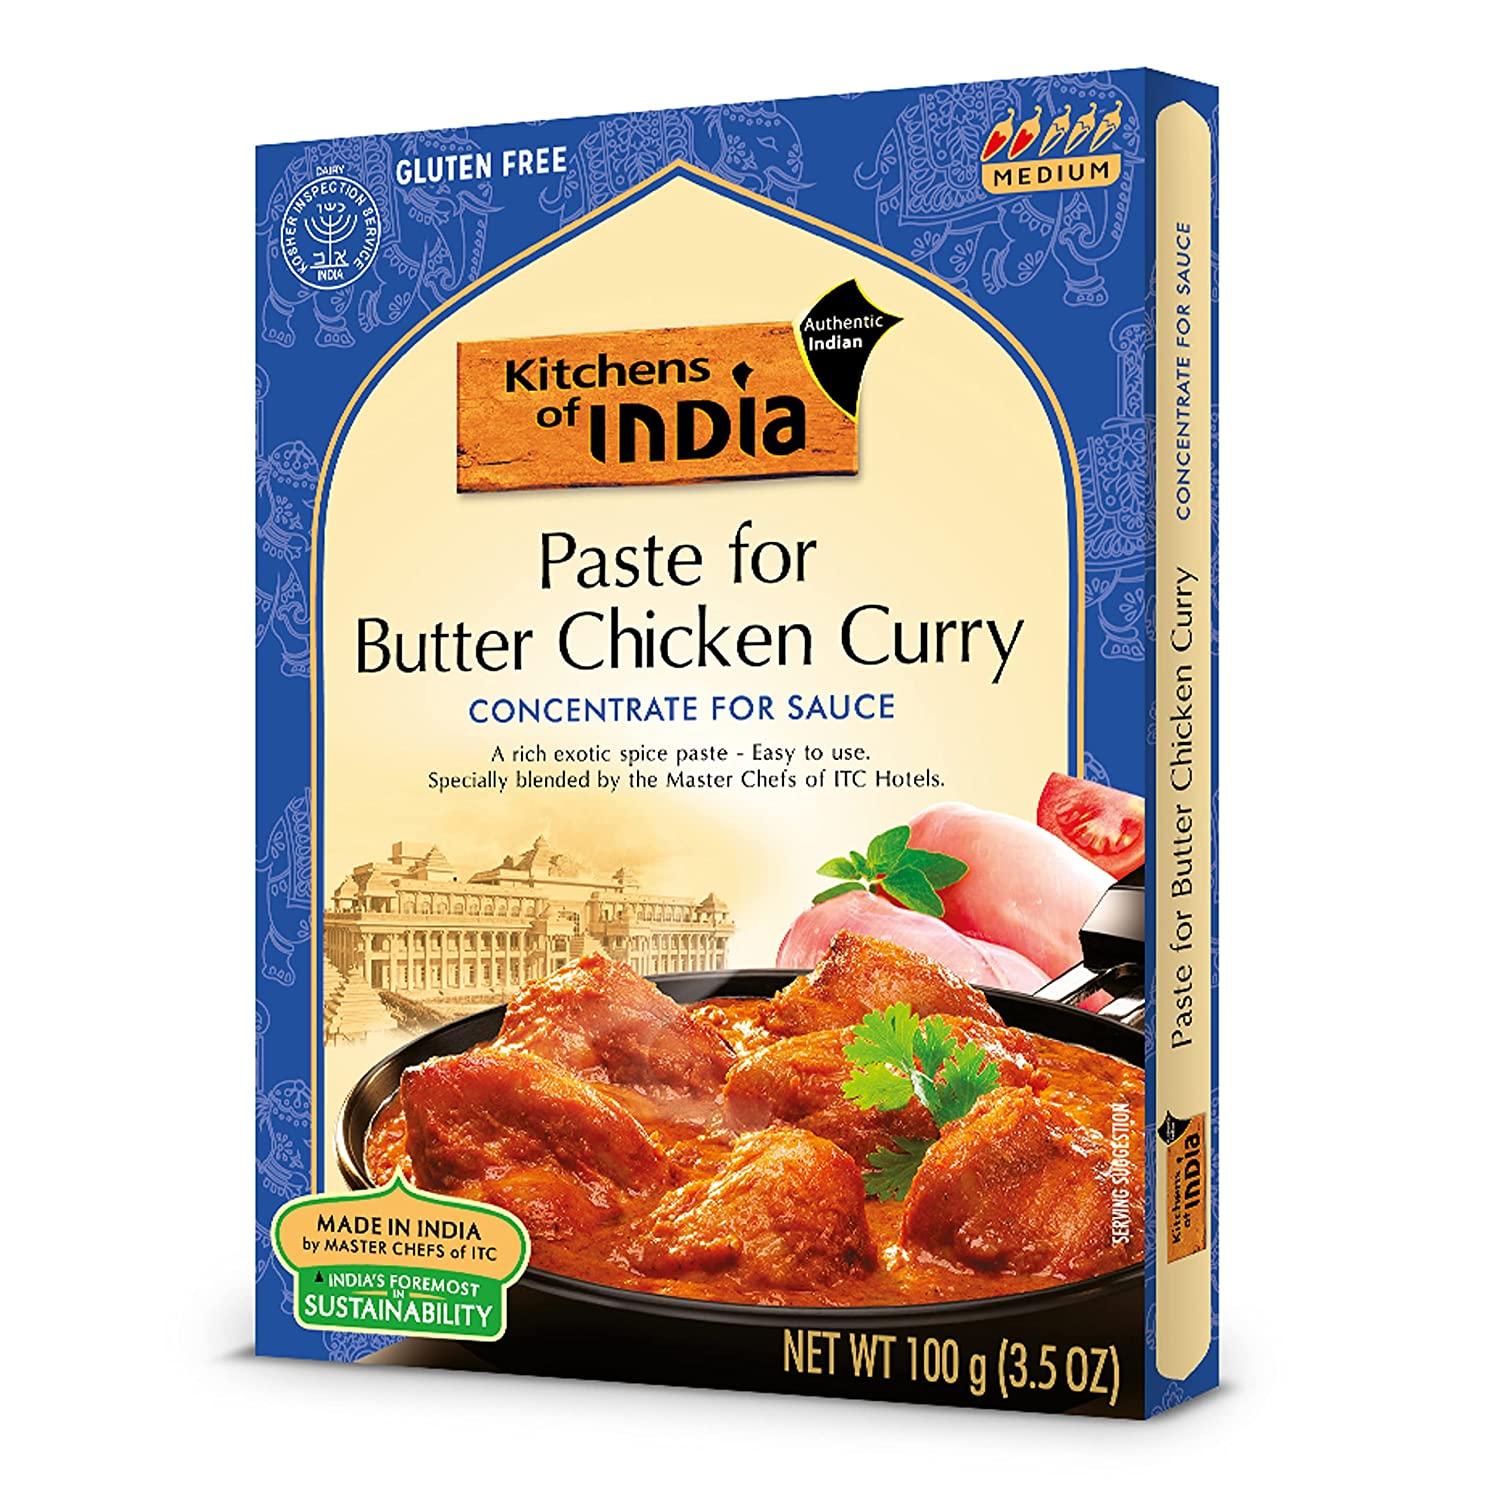 6 Kitchens Of India Paste for Butter Chicken Curry for $11.99 Shipped